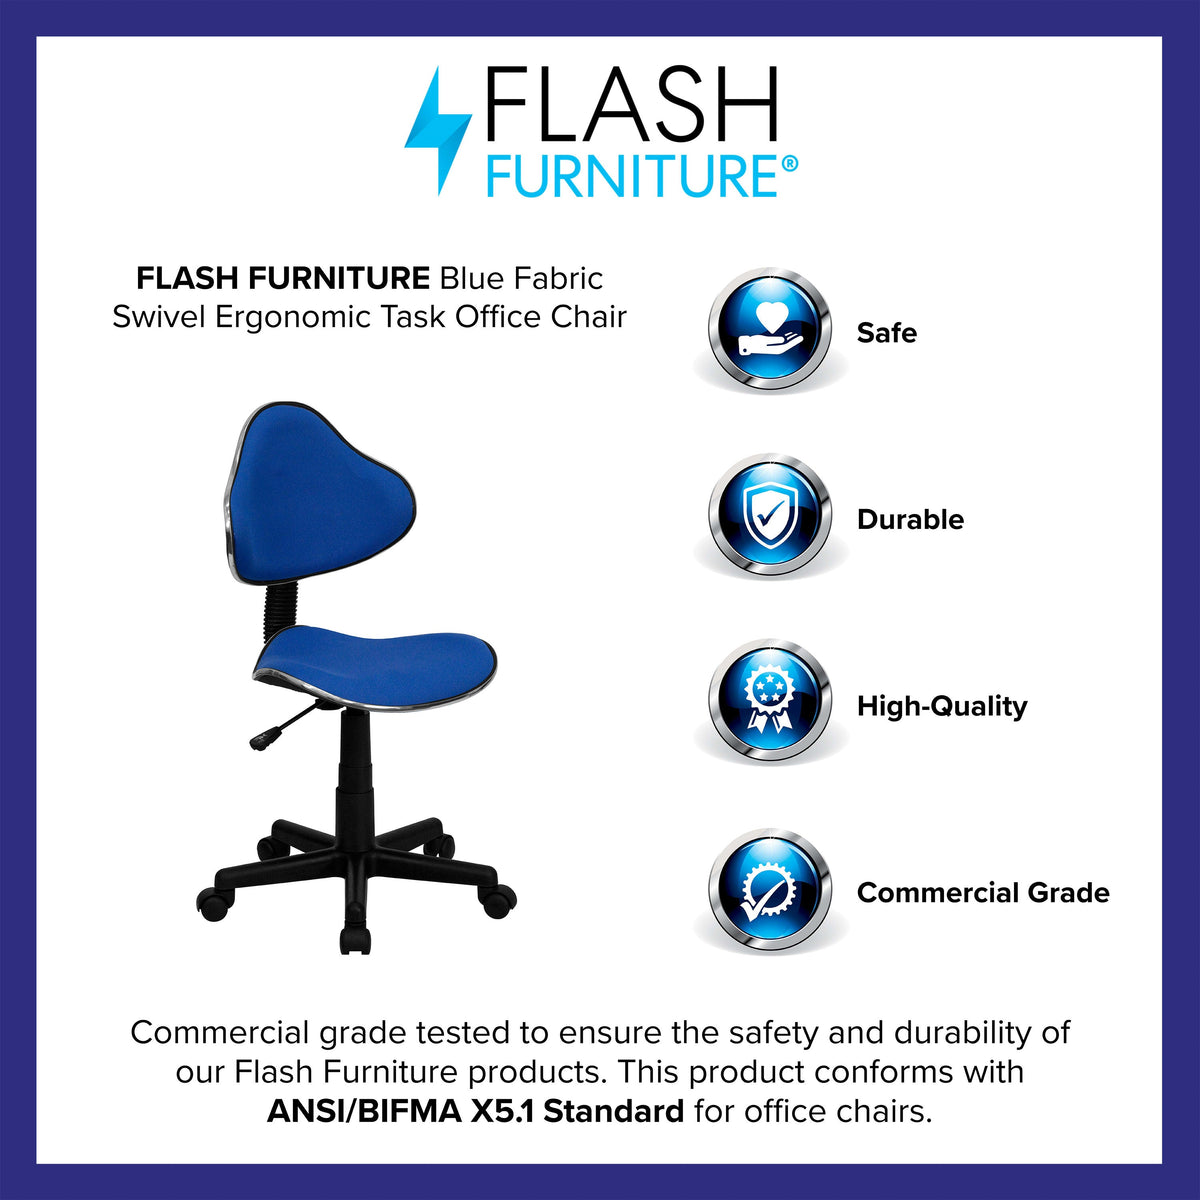 Blue |#| Blue Fabric Low Back Swivel Ergonomic Task Office Chair with Adjustable Height